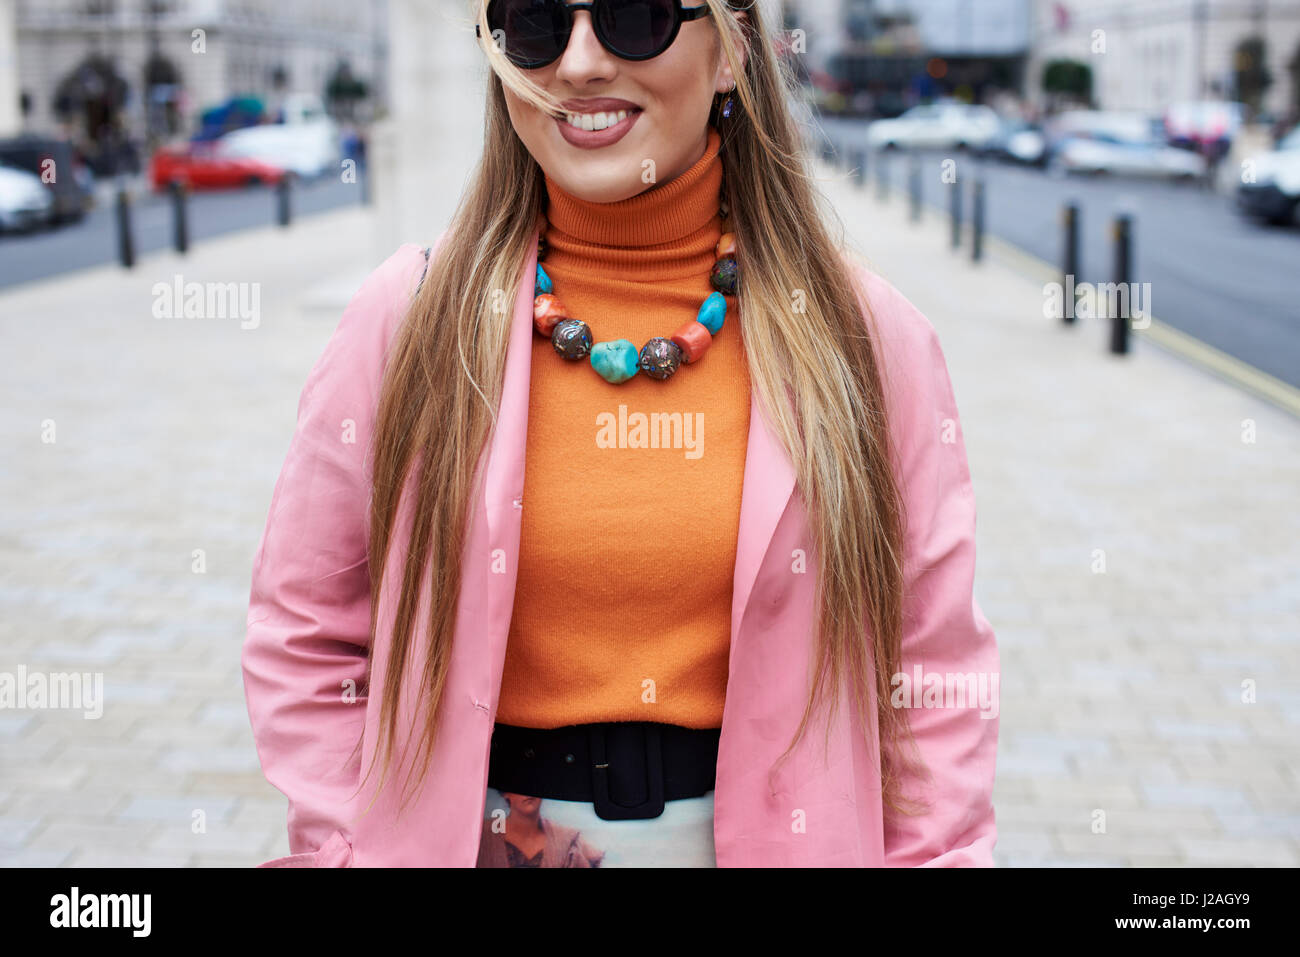 LONDON - FEBRUARY, 2017: Mid section of woman wearing pink coat and orange sweater with chunky stone necklace and rings standing in a street during London Fashion Week, day five. Stock Photo